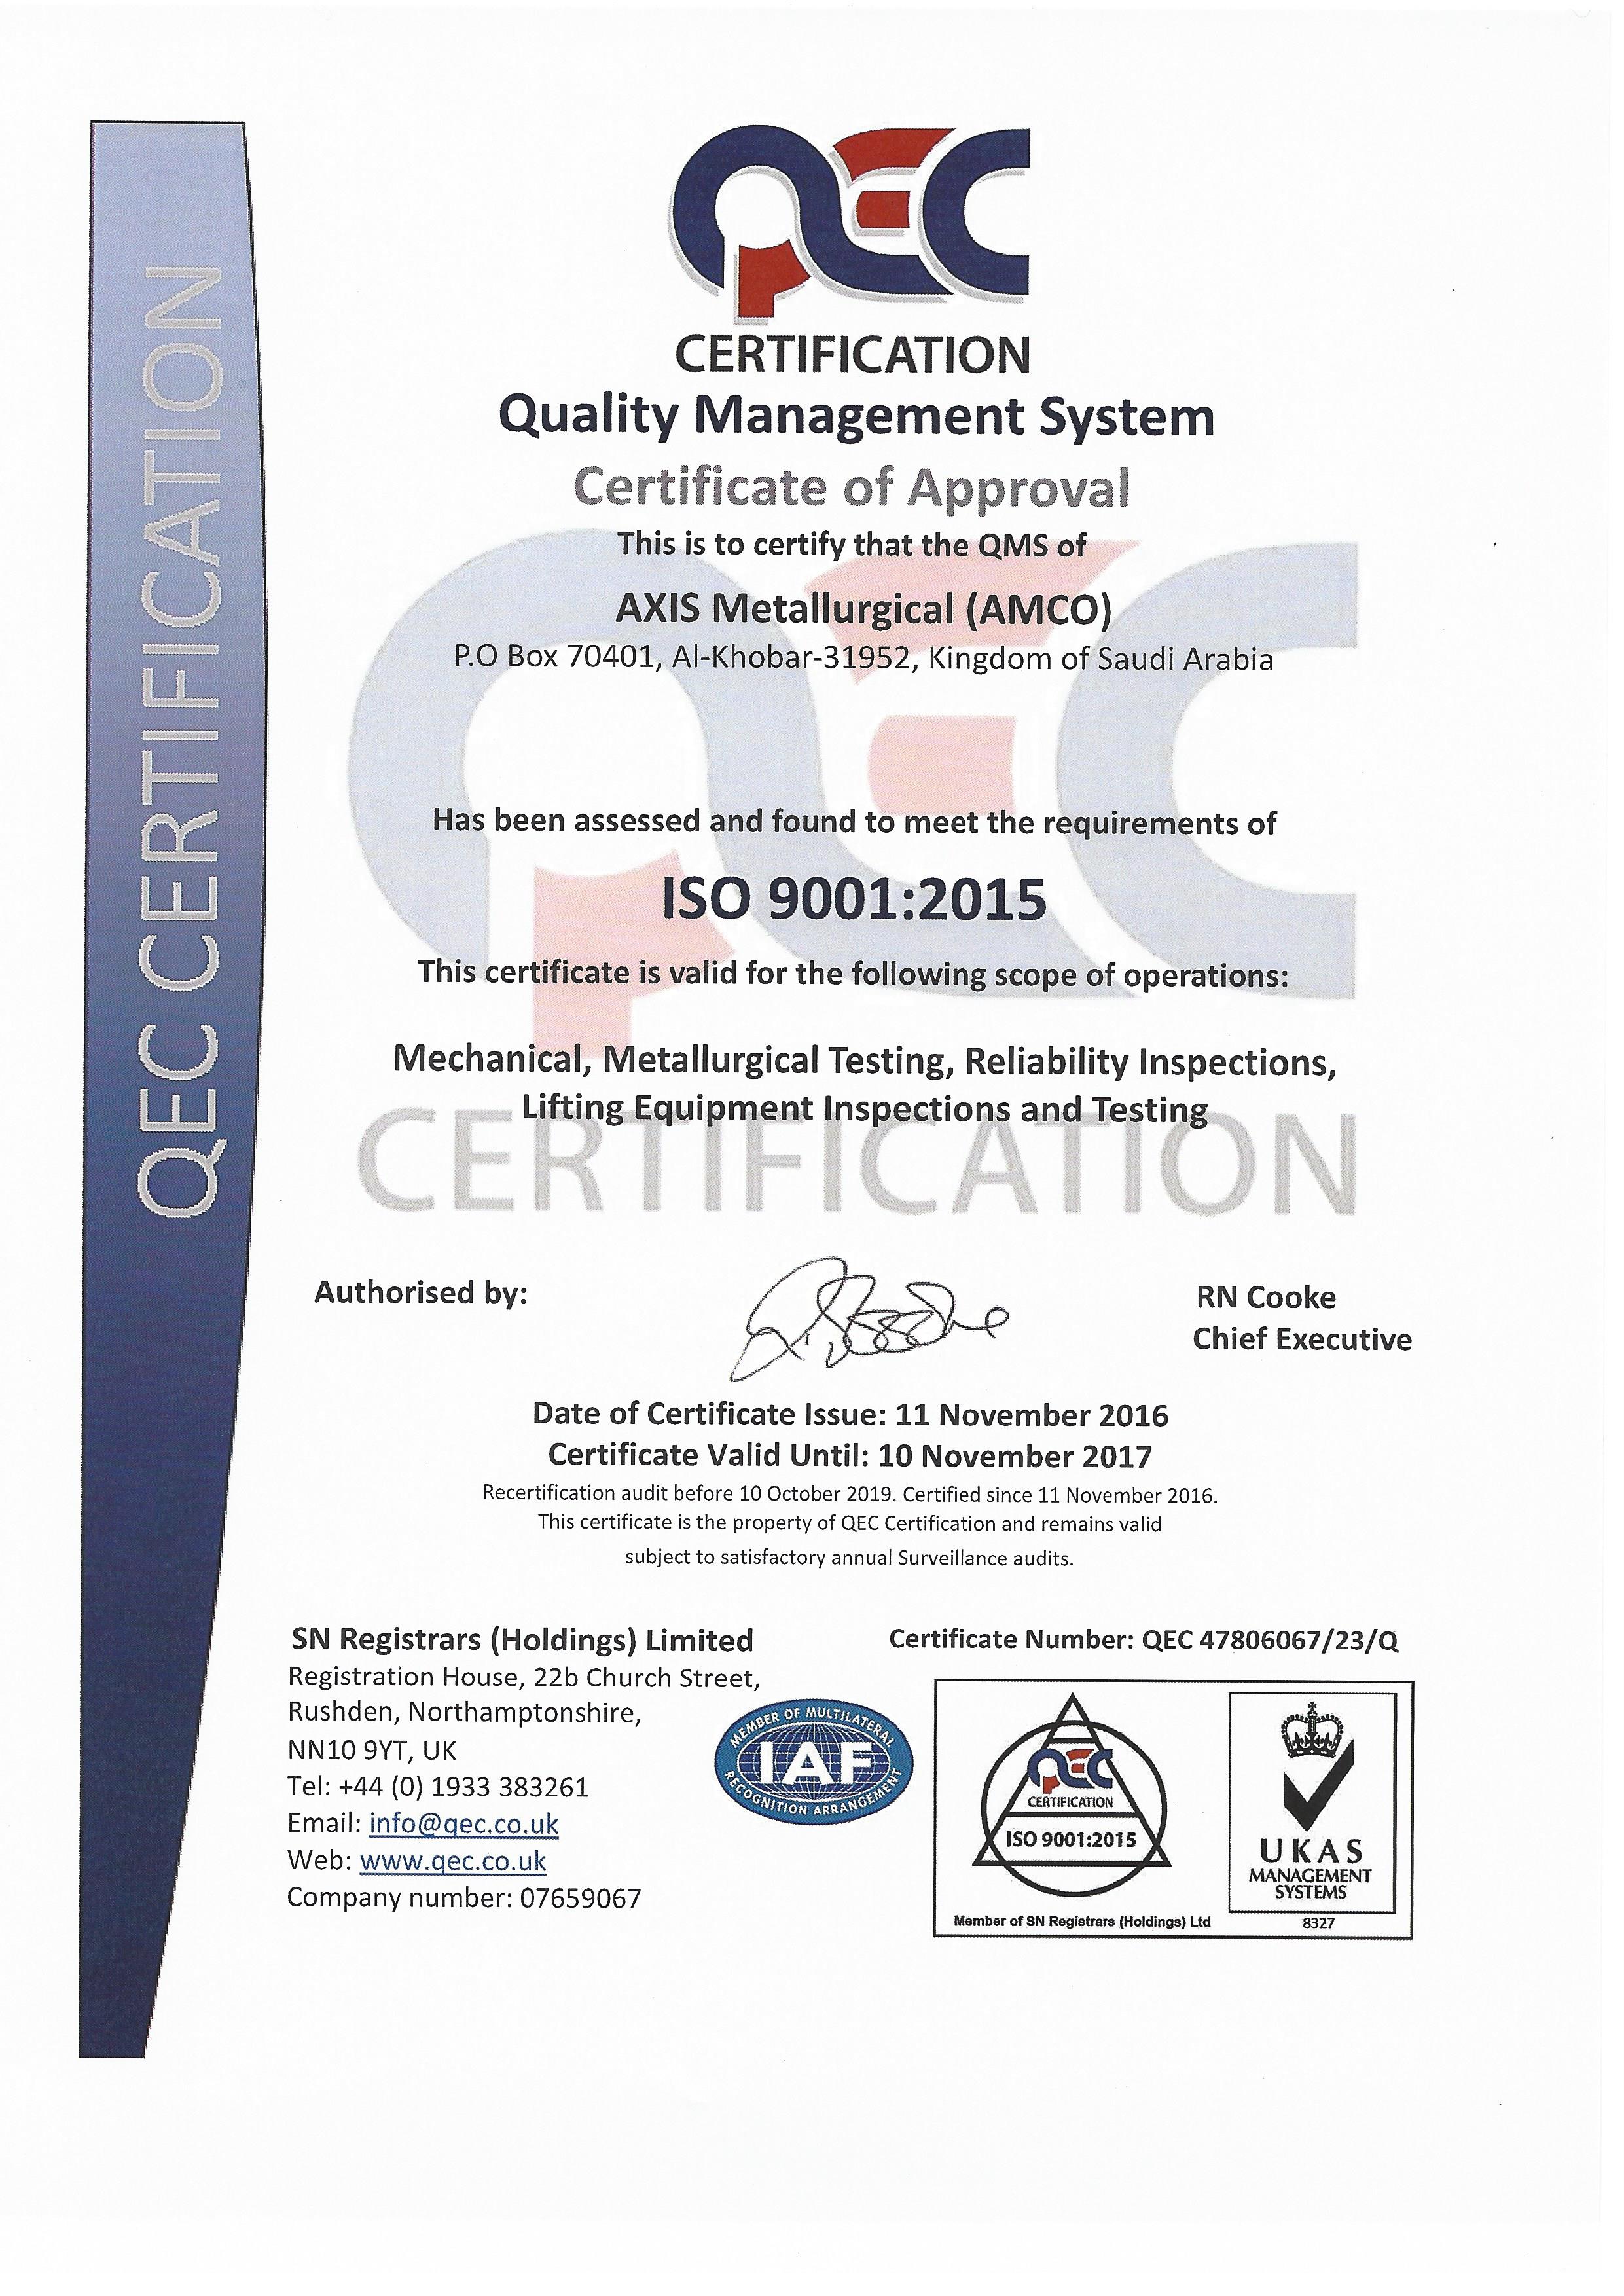 amco-iso-9001-2015